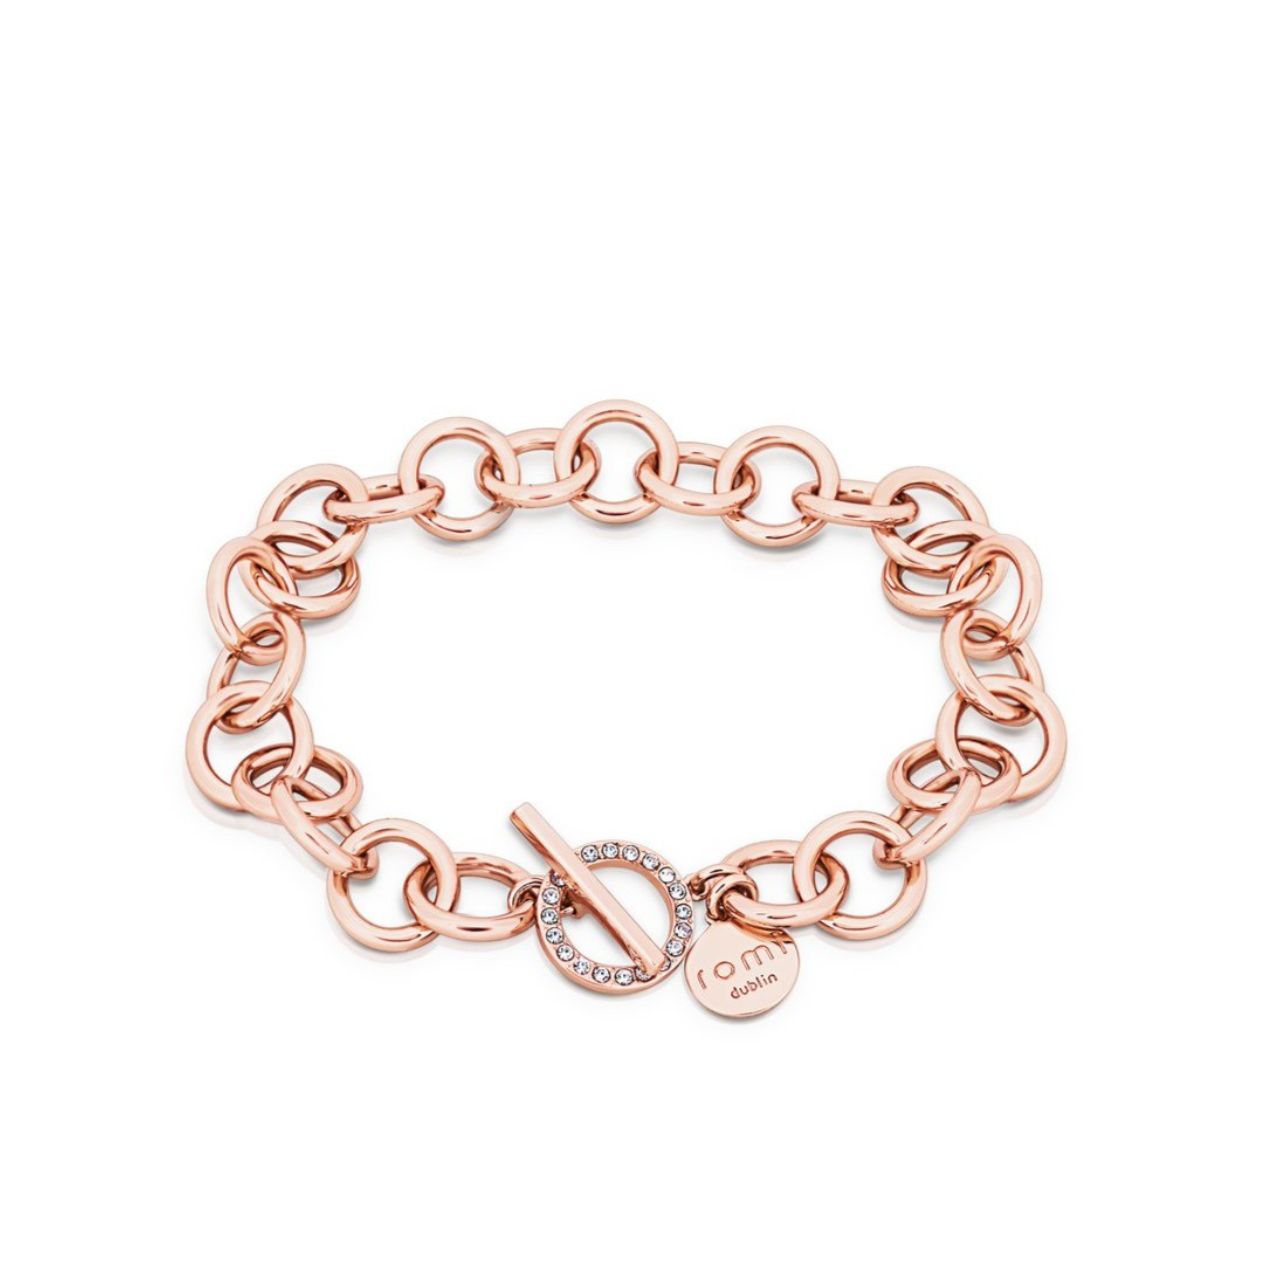 Tipperary Crystal Romi Dublin Rose Gold Circle Bar Heavy Bracelet  Simple and understated this collection has a contemporary and sleek look that will allow you to accessorise with any outfit.